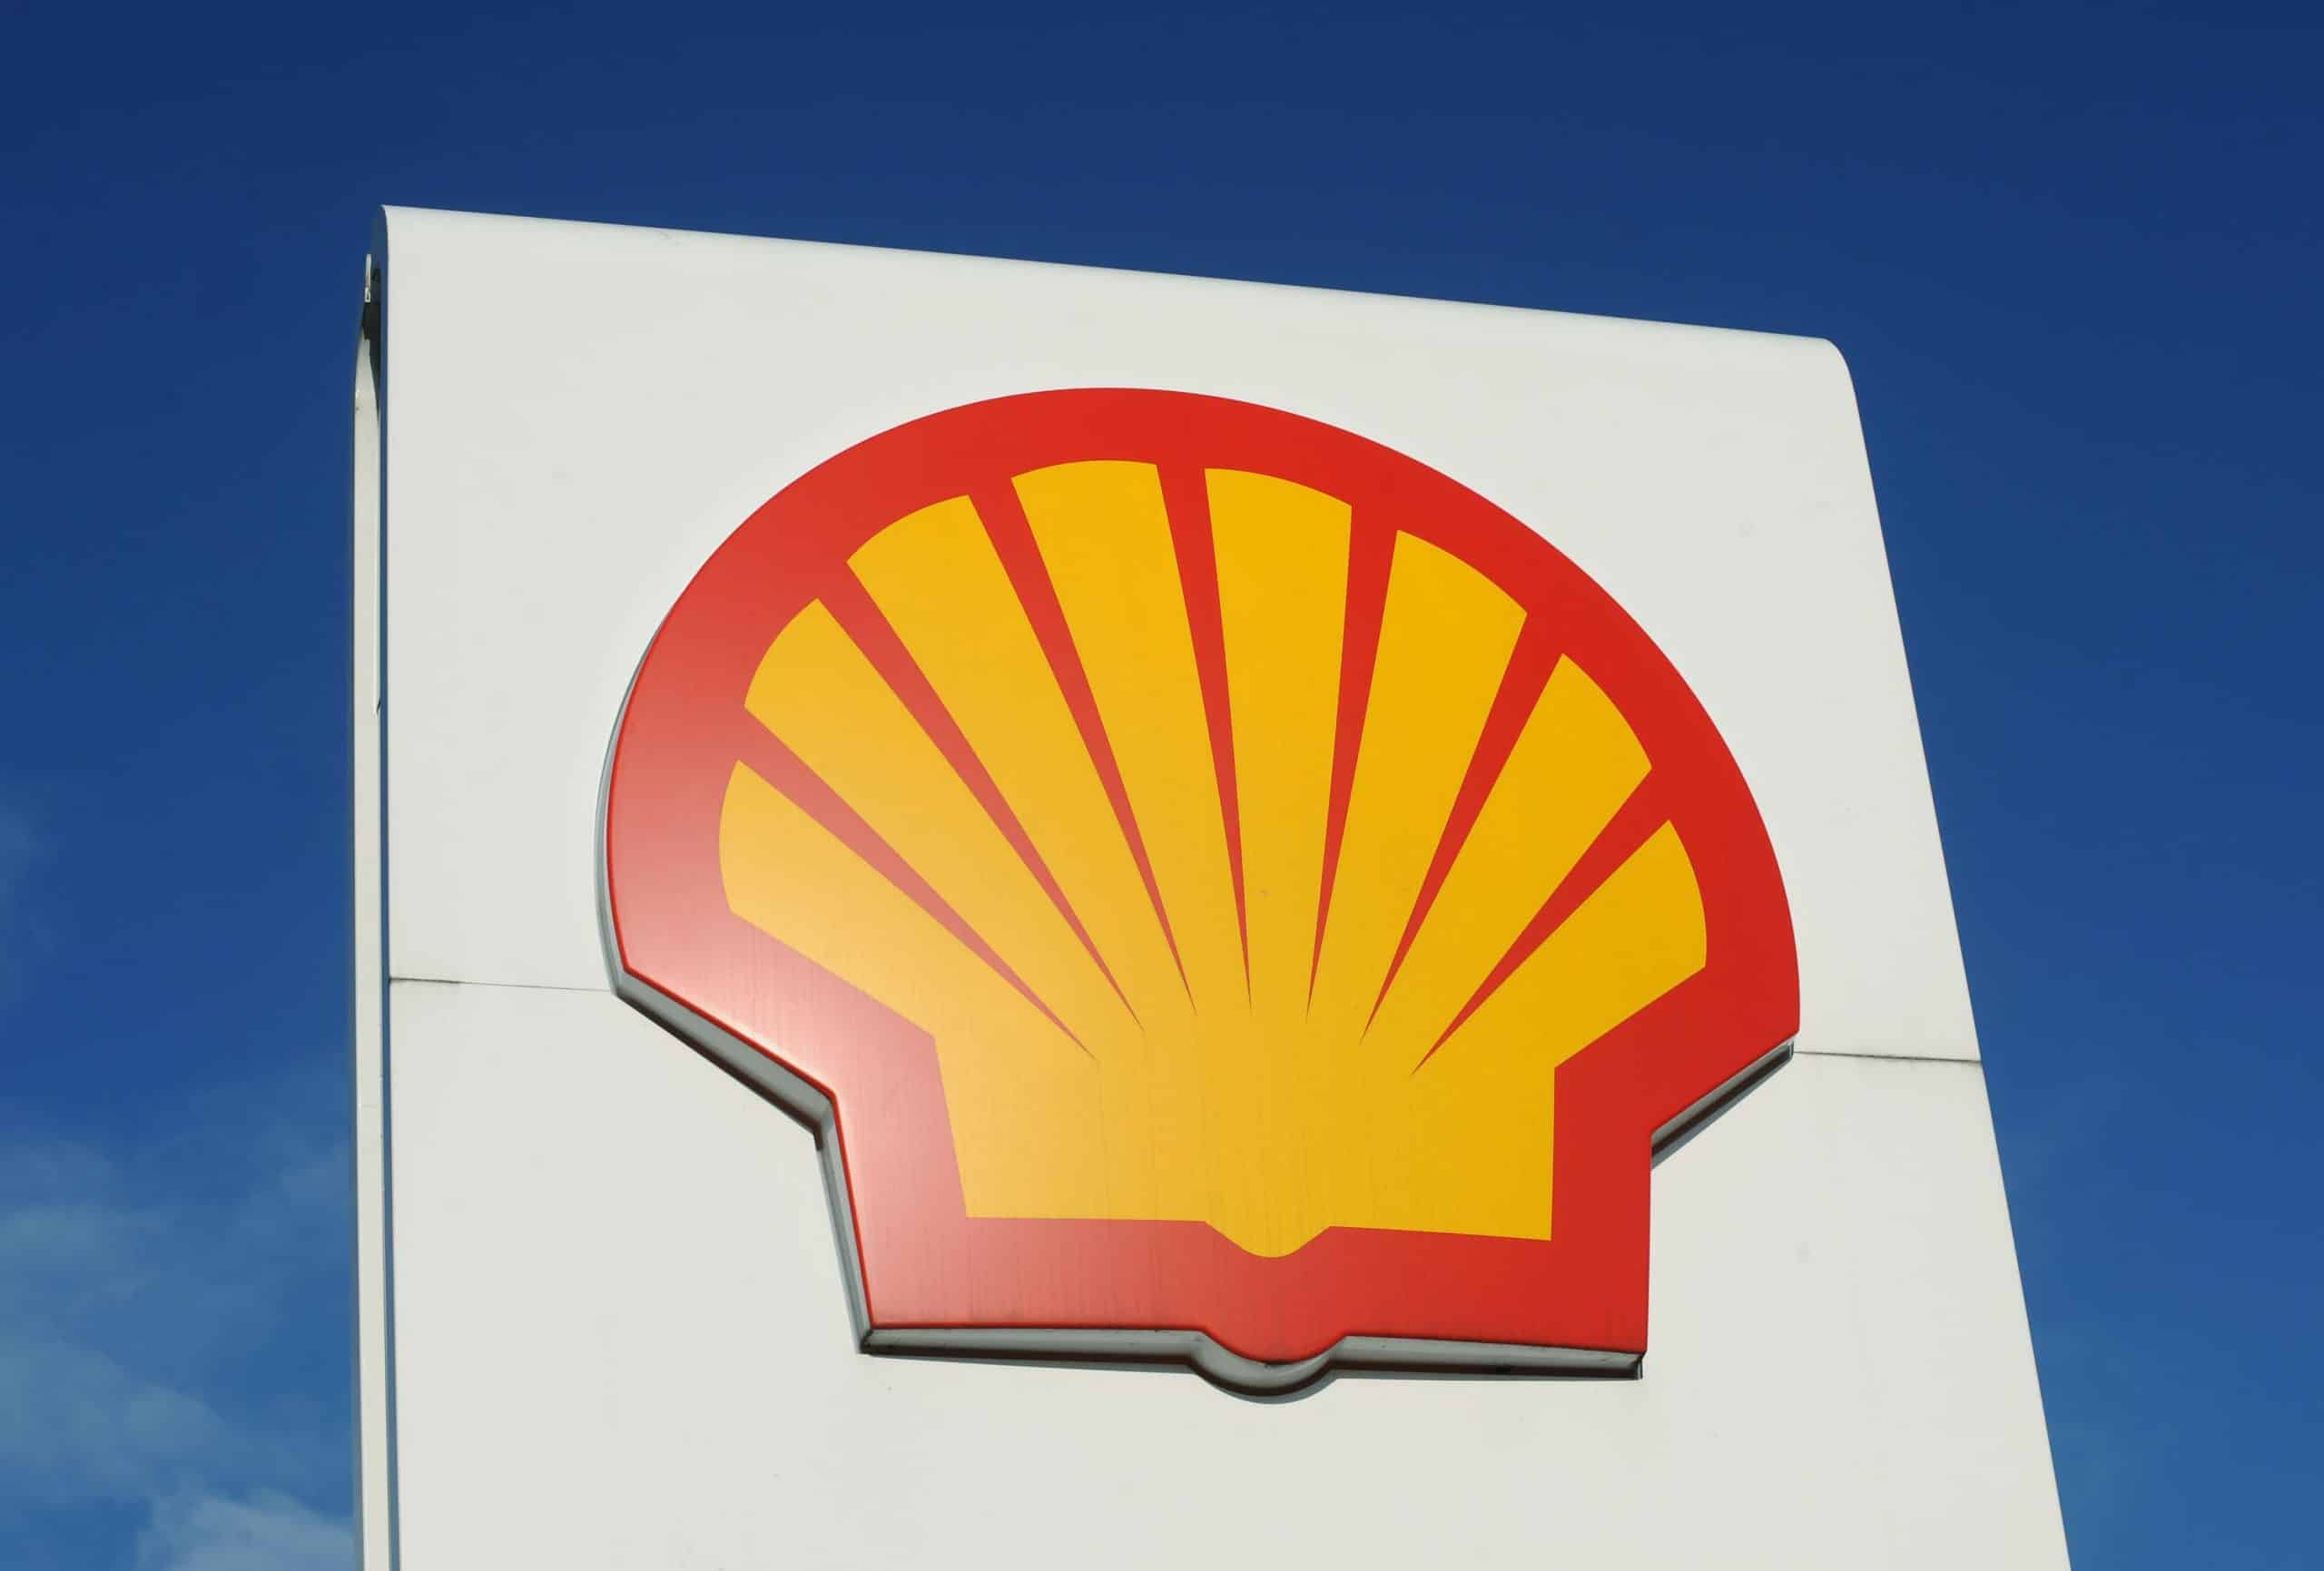 Shell boss implores Govt to tax gas and oil companies to help poorest